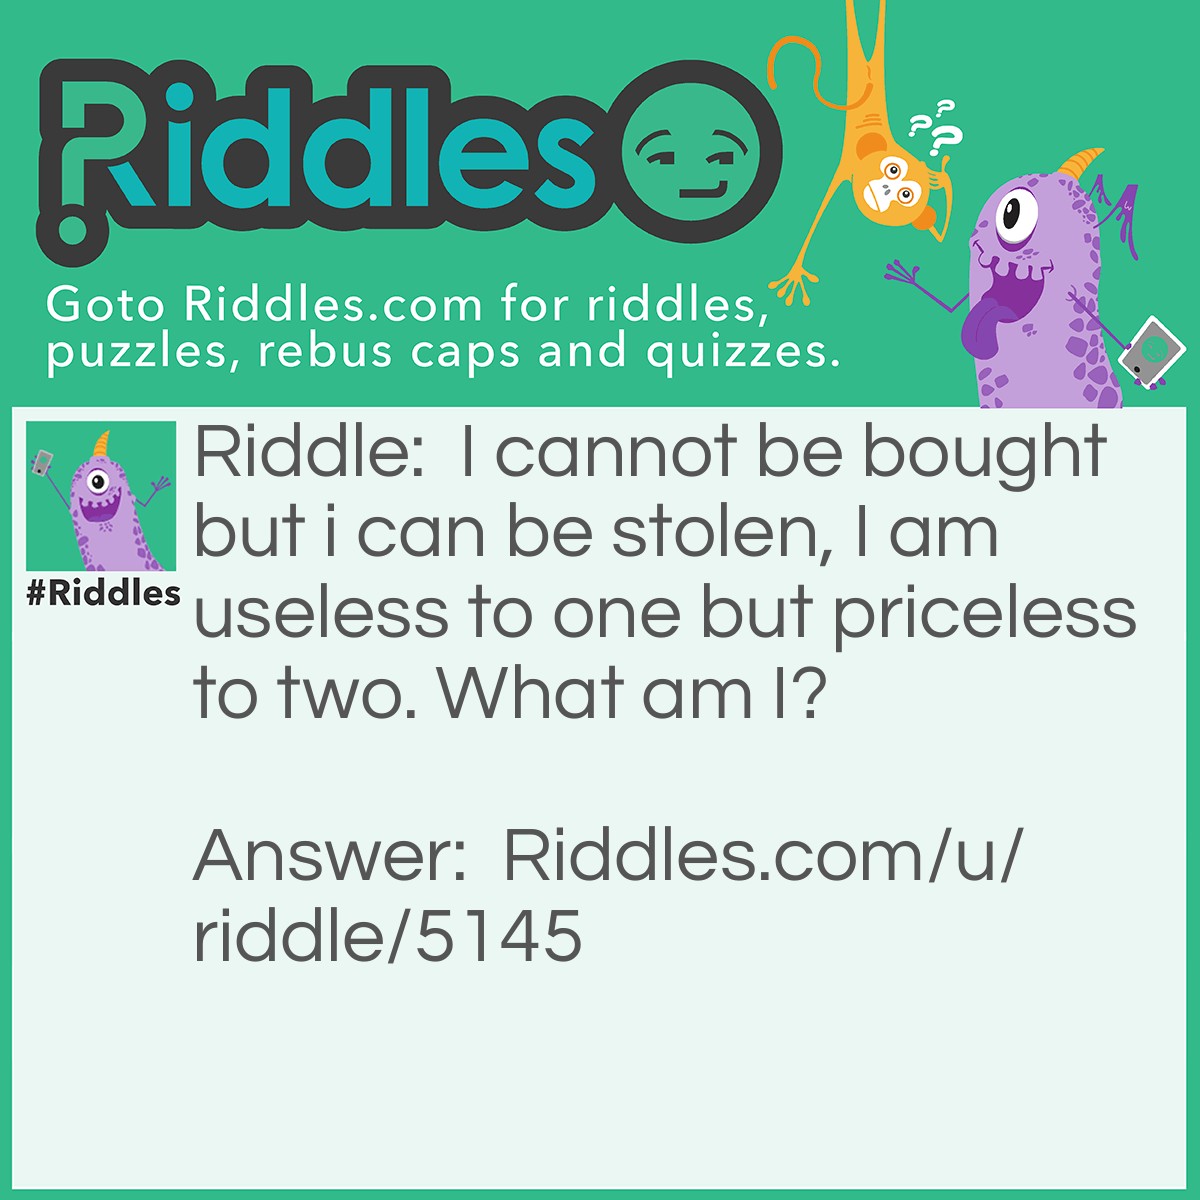 Riddle: I cannot be bought but i can be stolen, I am useless to one but priceless to two. What am I? Answer: Love